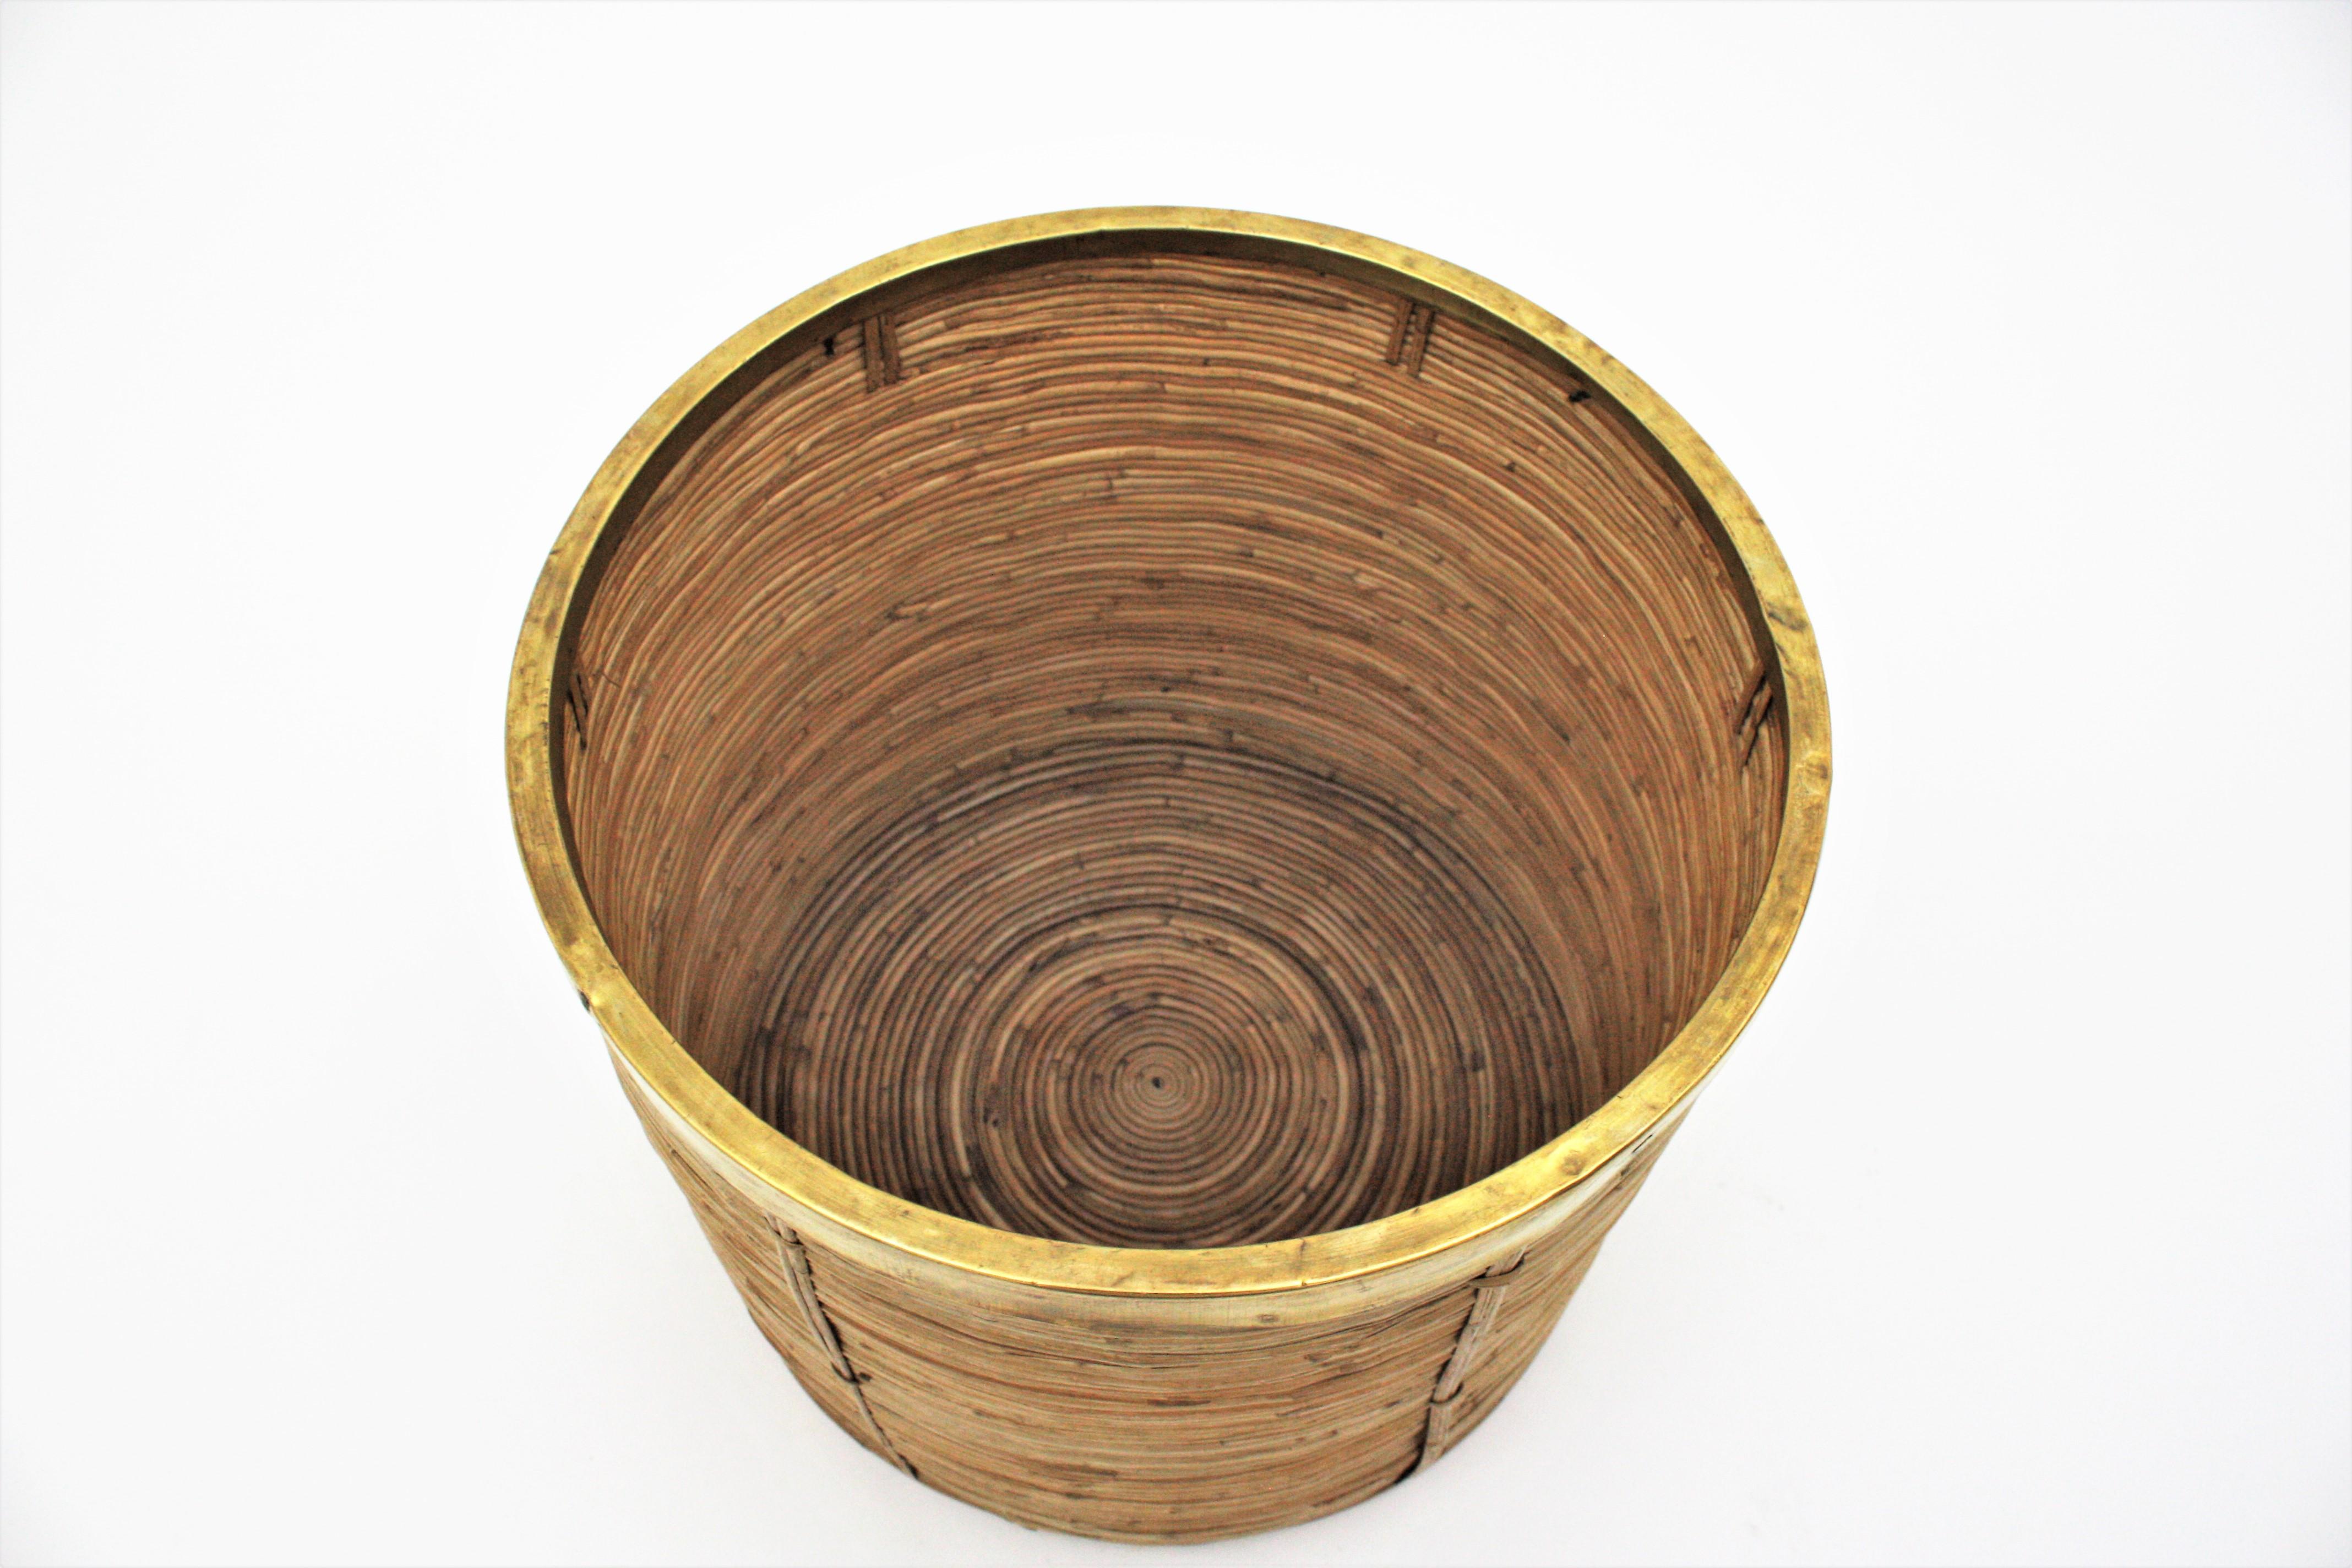 Large Rattan Bamboo Round Planter with Brass Rim, Italy, 1970s For Sale 4